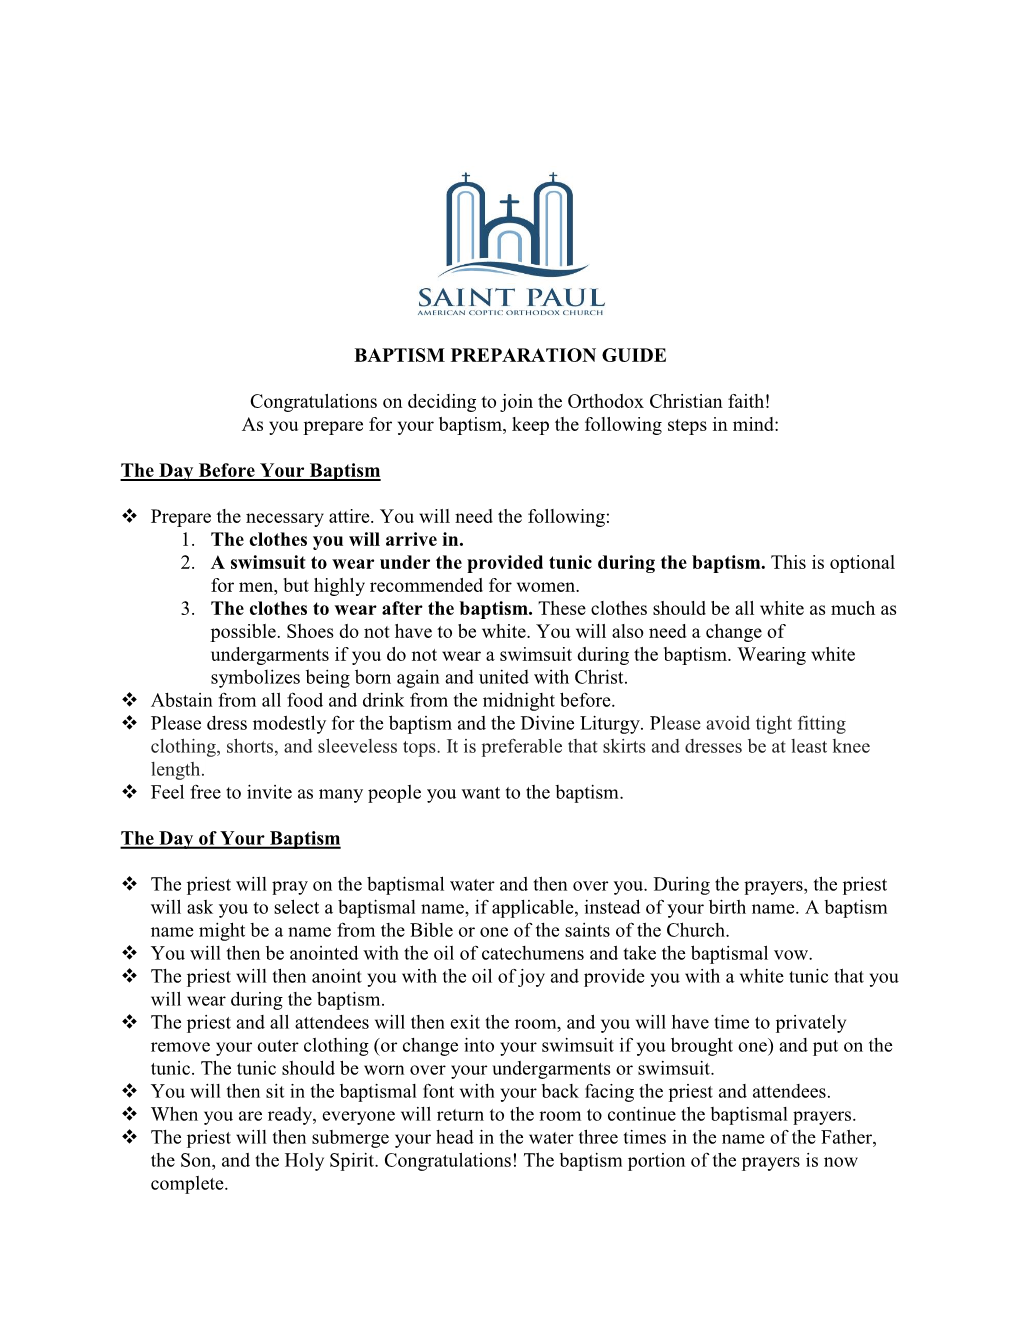 BAPTISM PREPARATION GUIDE Congratulations on Deciding to Join